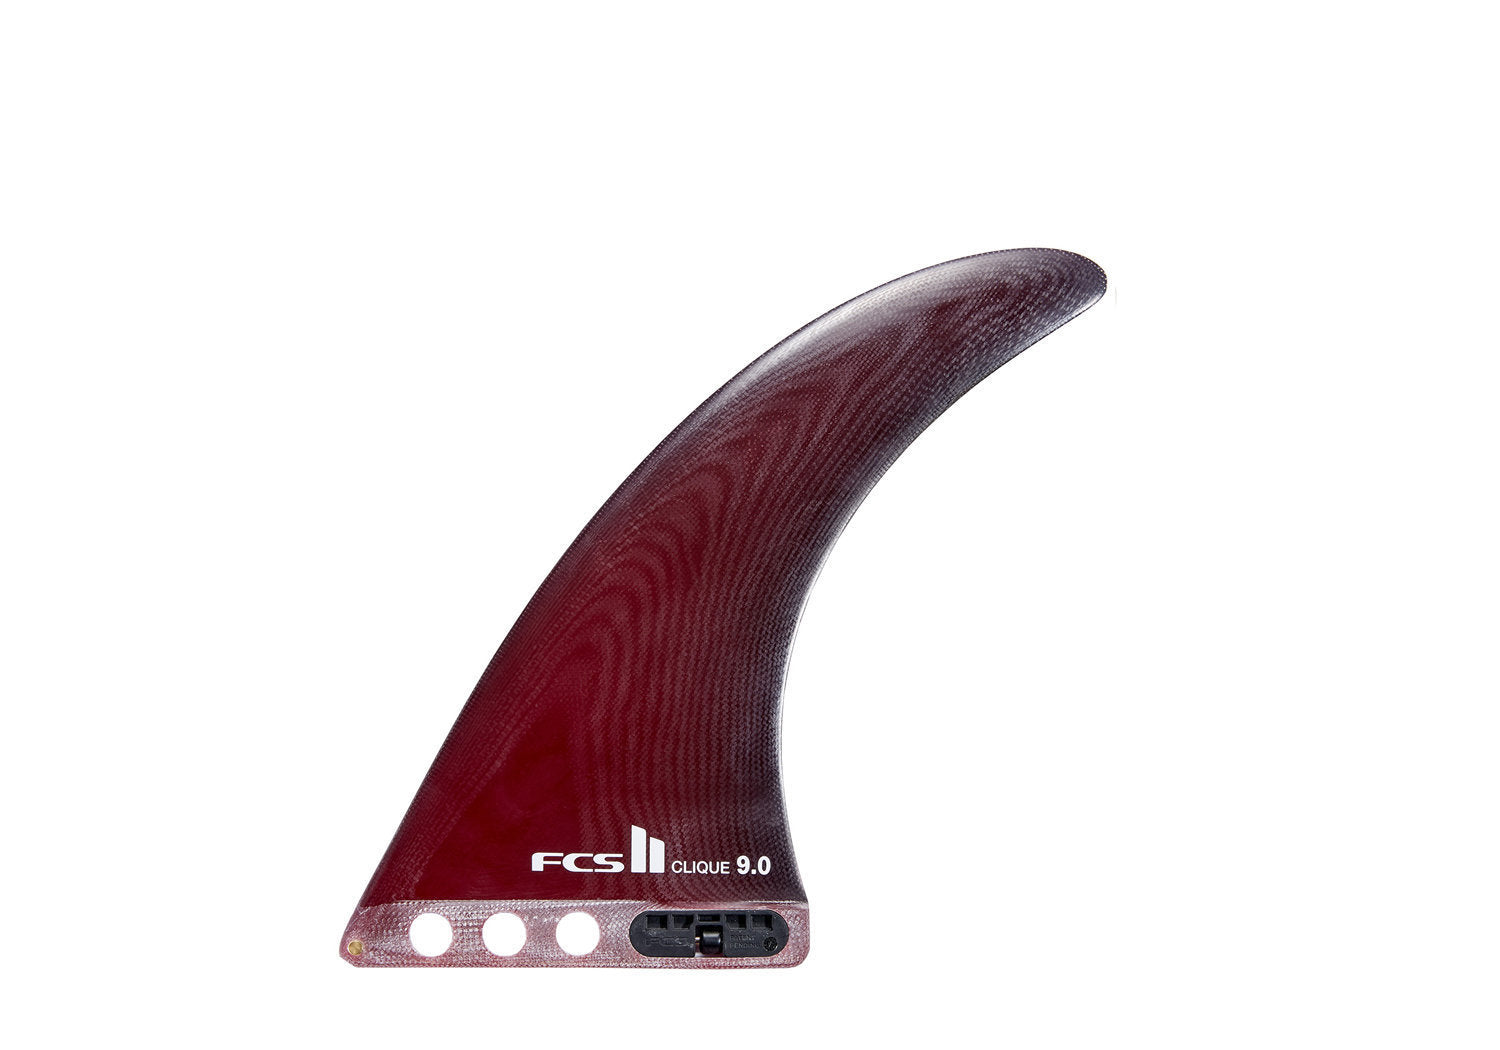 FCS 2 Clique PG Longboard Fin Dust Red 9in